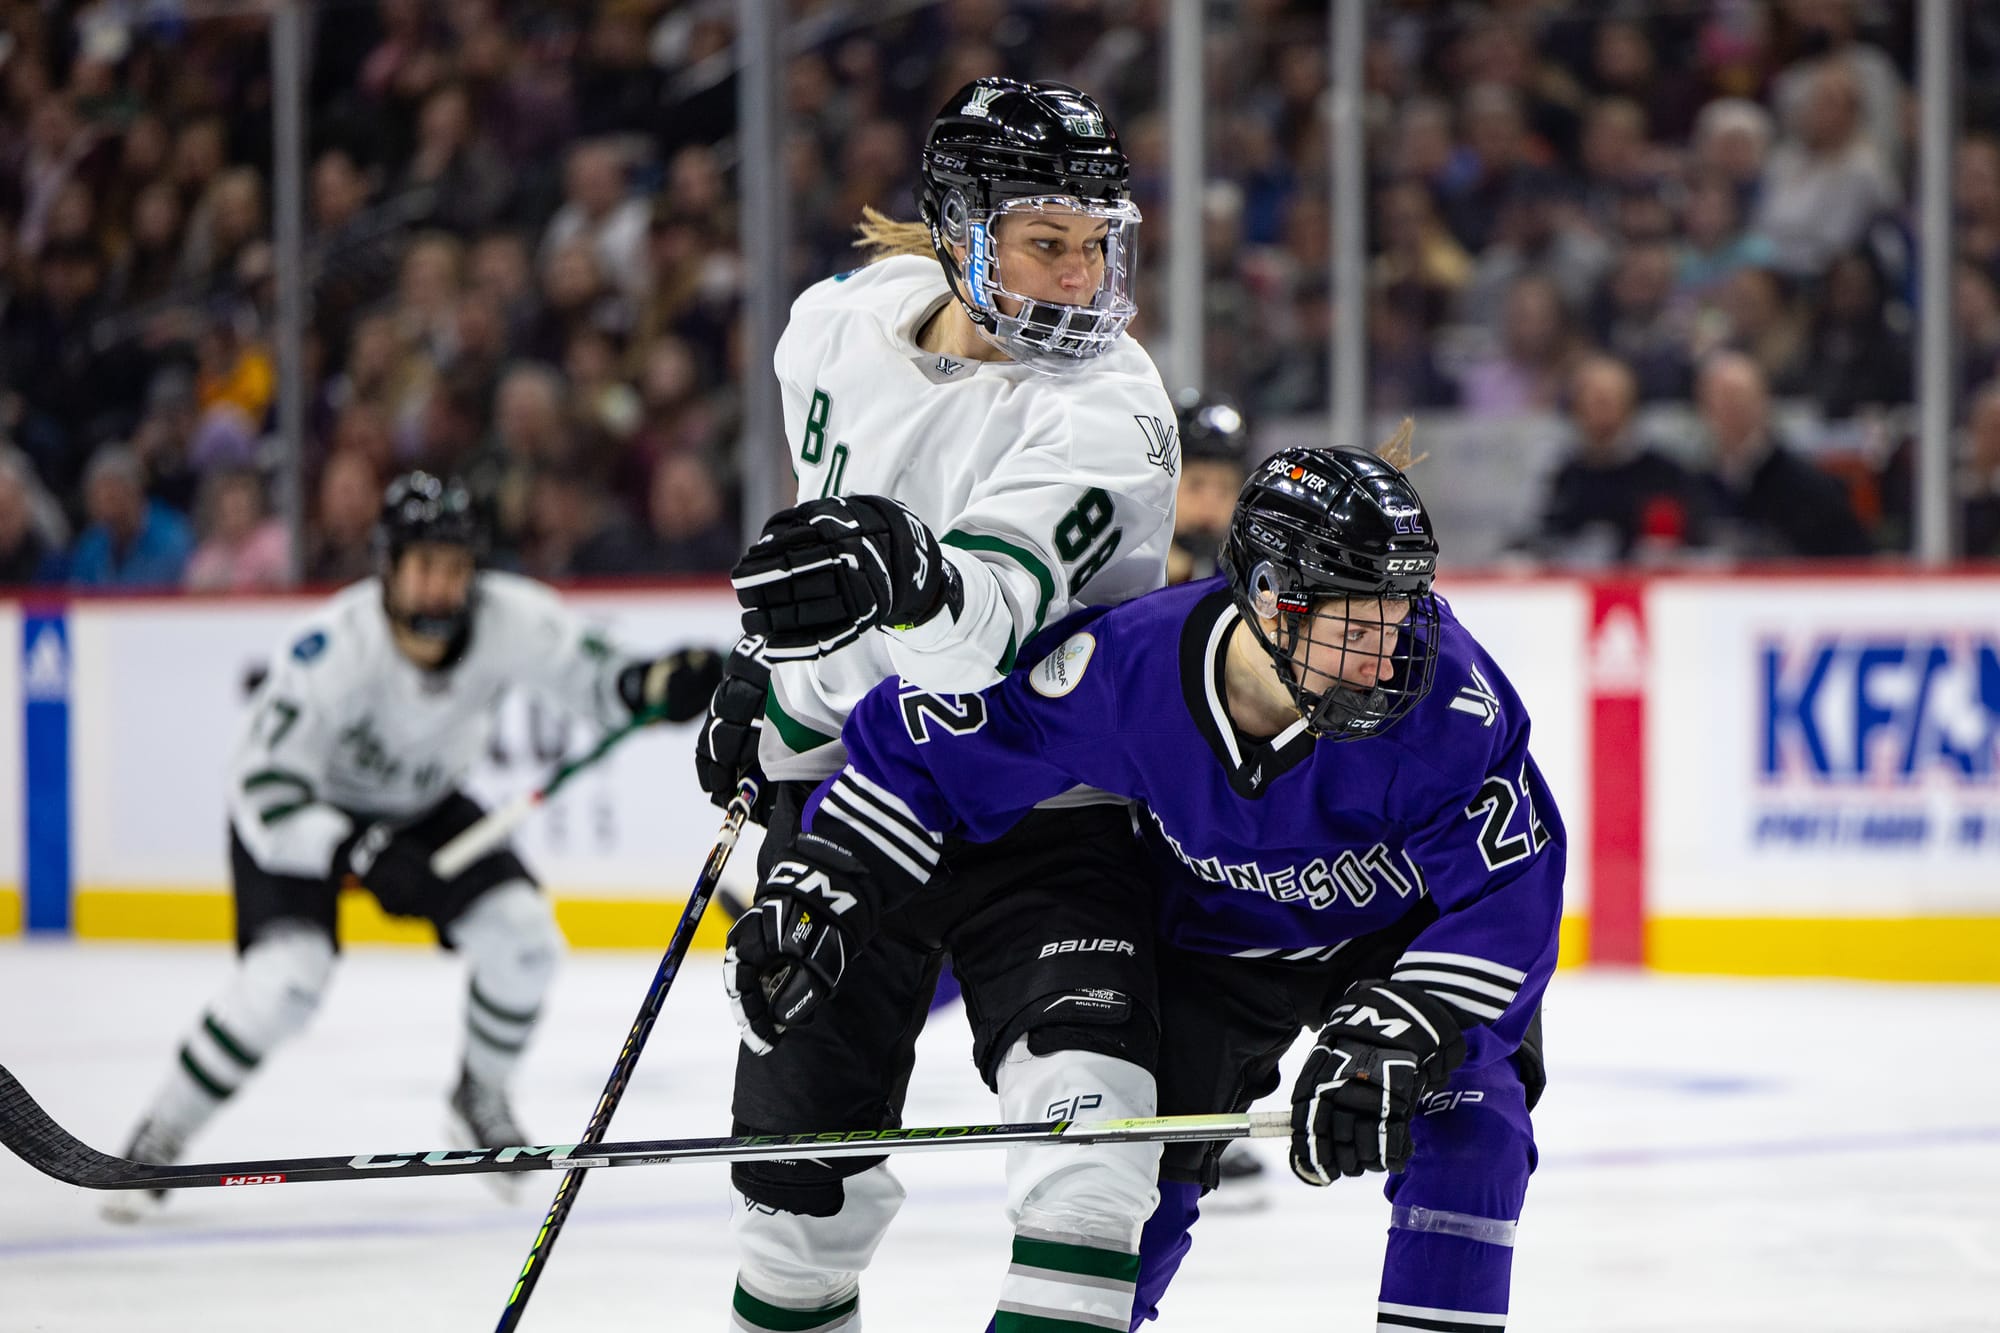 Susanna Tapani and Natalie Buchbinder battle in pursuit of the puck. Buchbinder is hunched over pushing in to Tapani, while Tapani is upright and trying to get around Buchbinder. Tapani is wearing a white away uniform, while Buchbinder is in a purple home one.